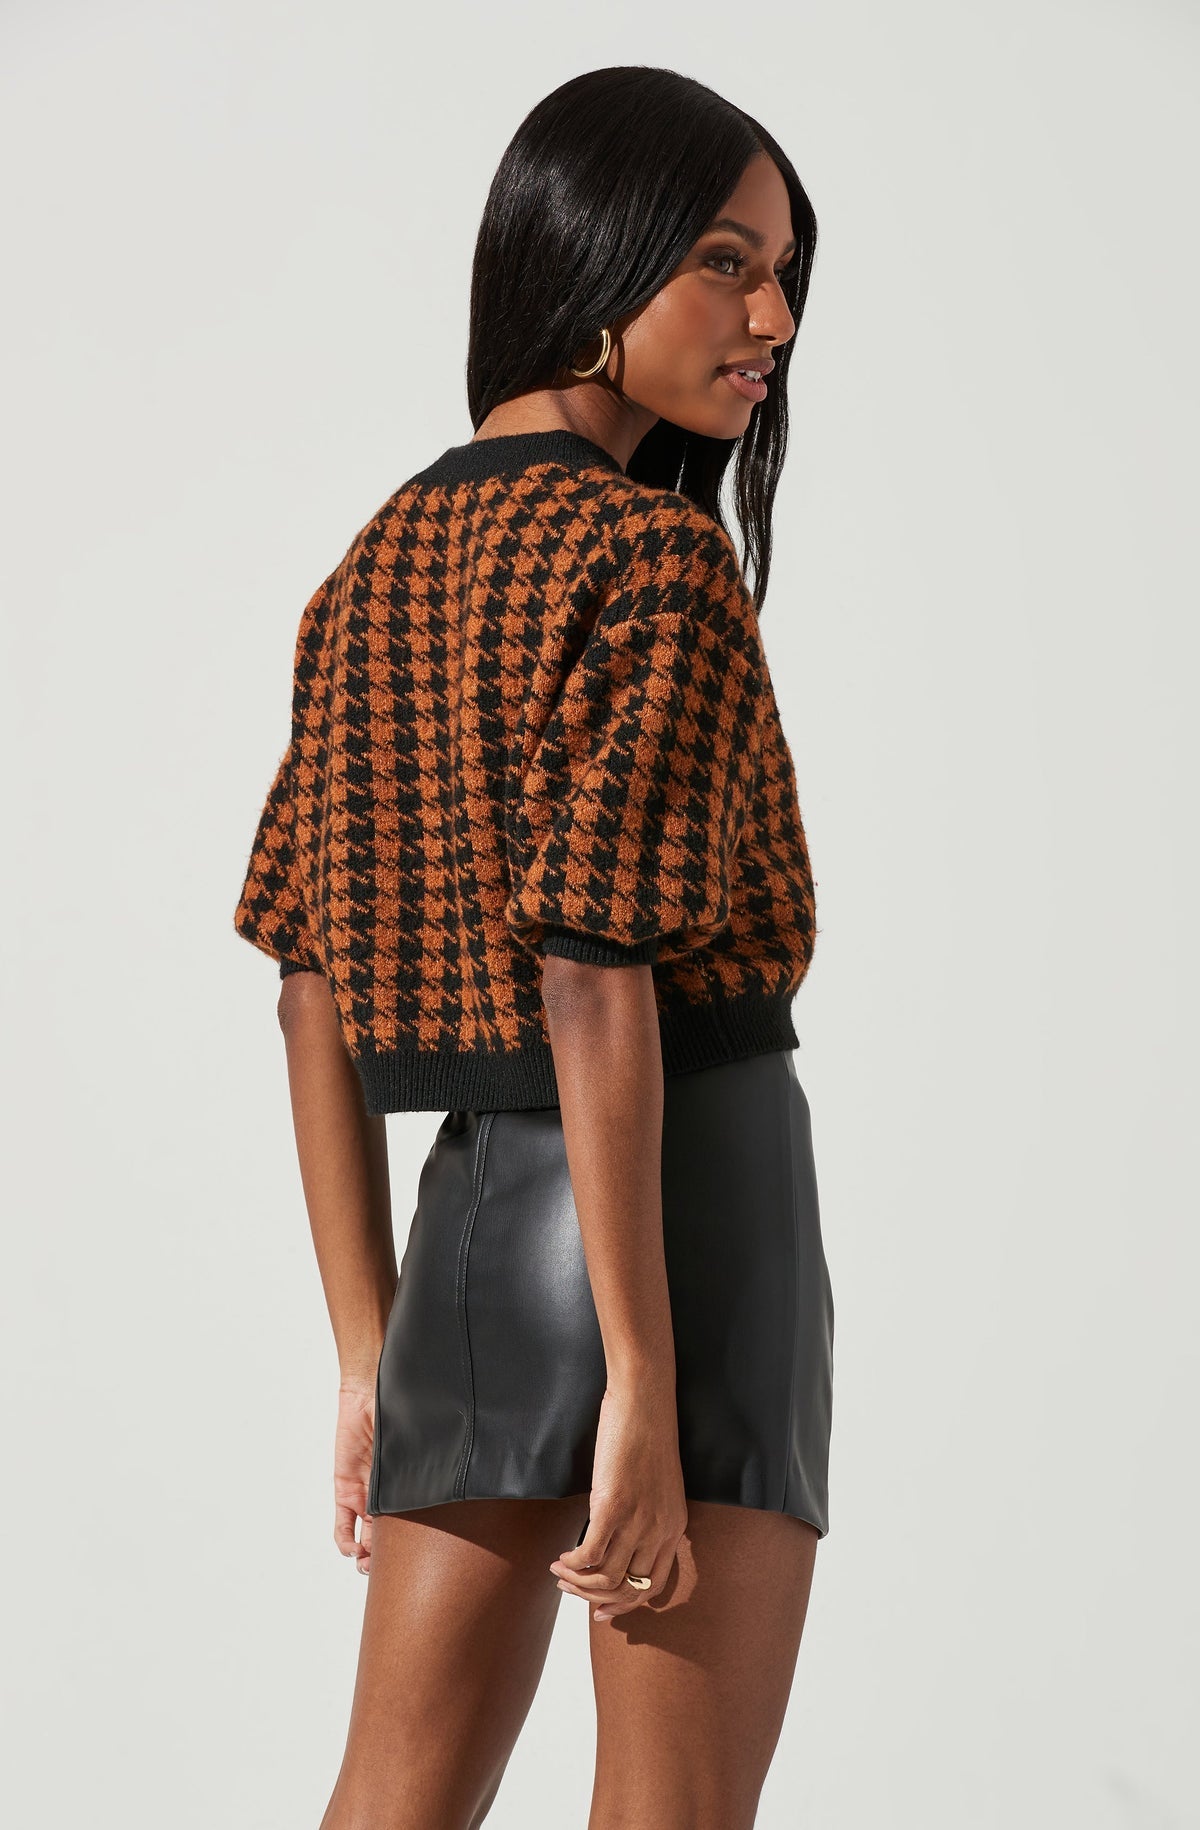 Colette Houndstooth Sweater - FINAL SALE